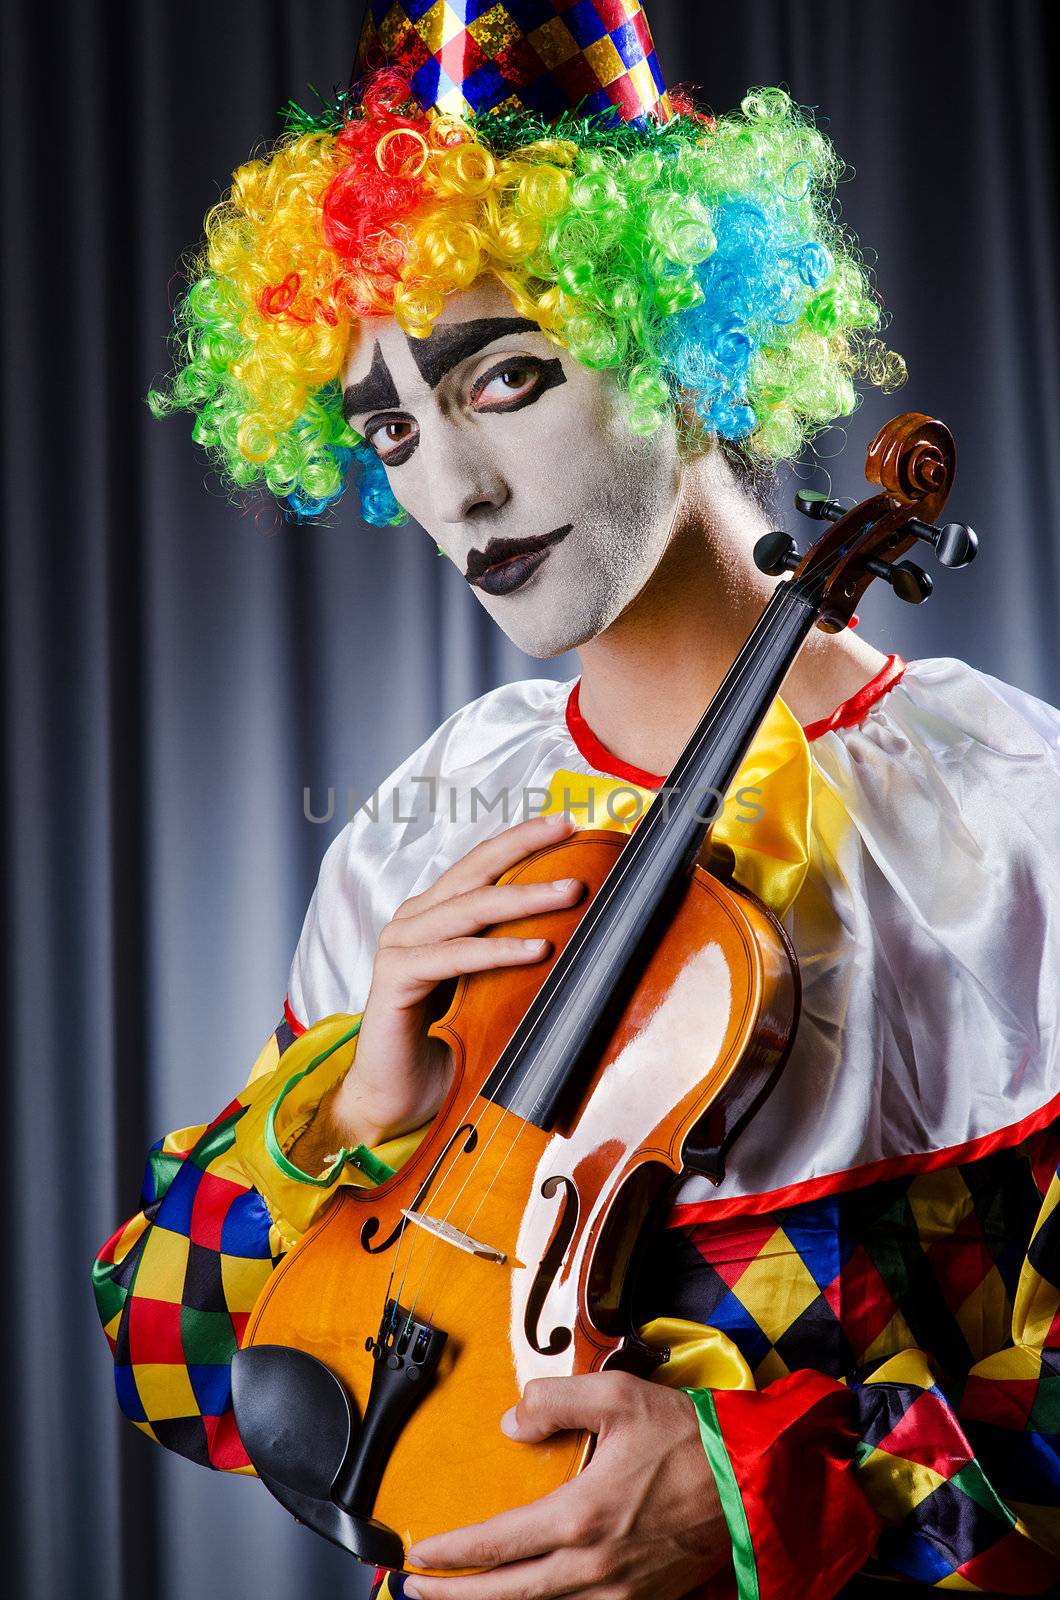 Clown playing on the violin by Elnur